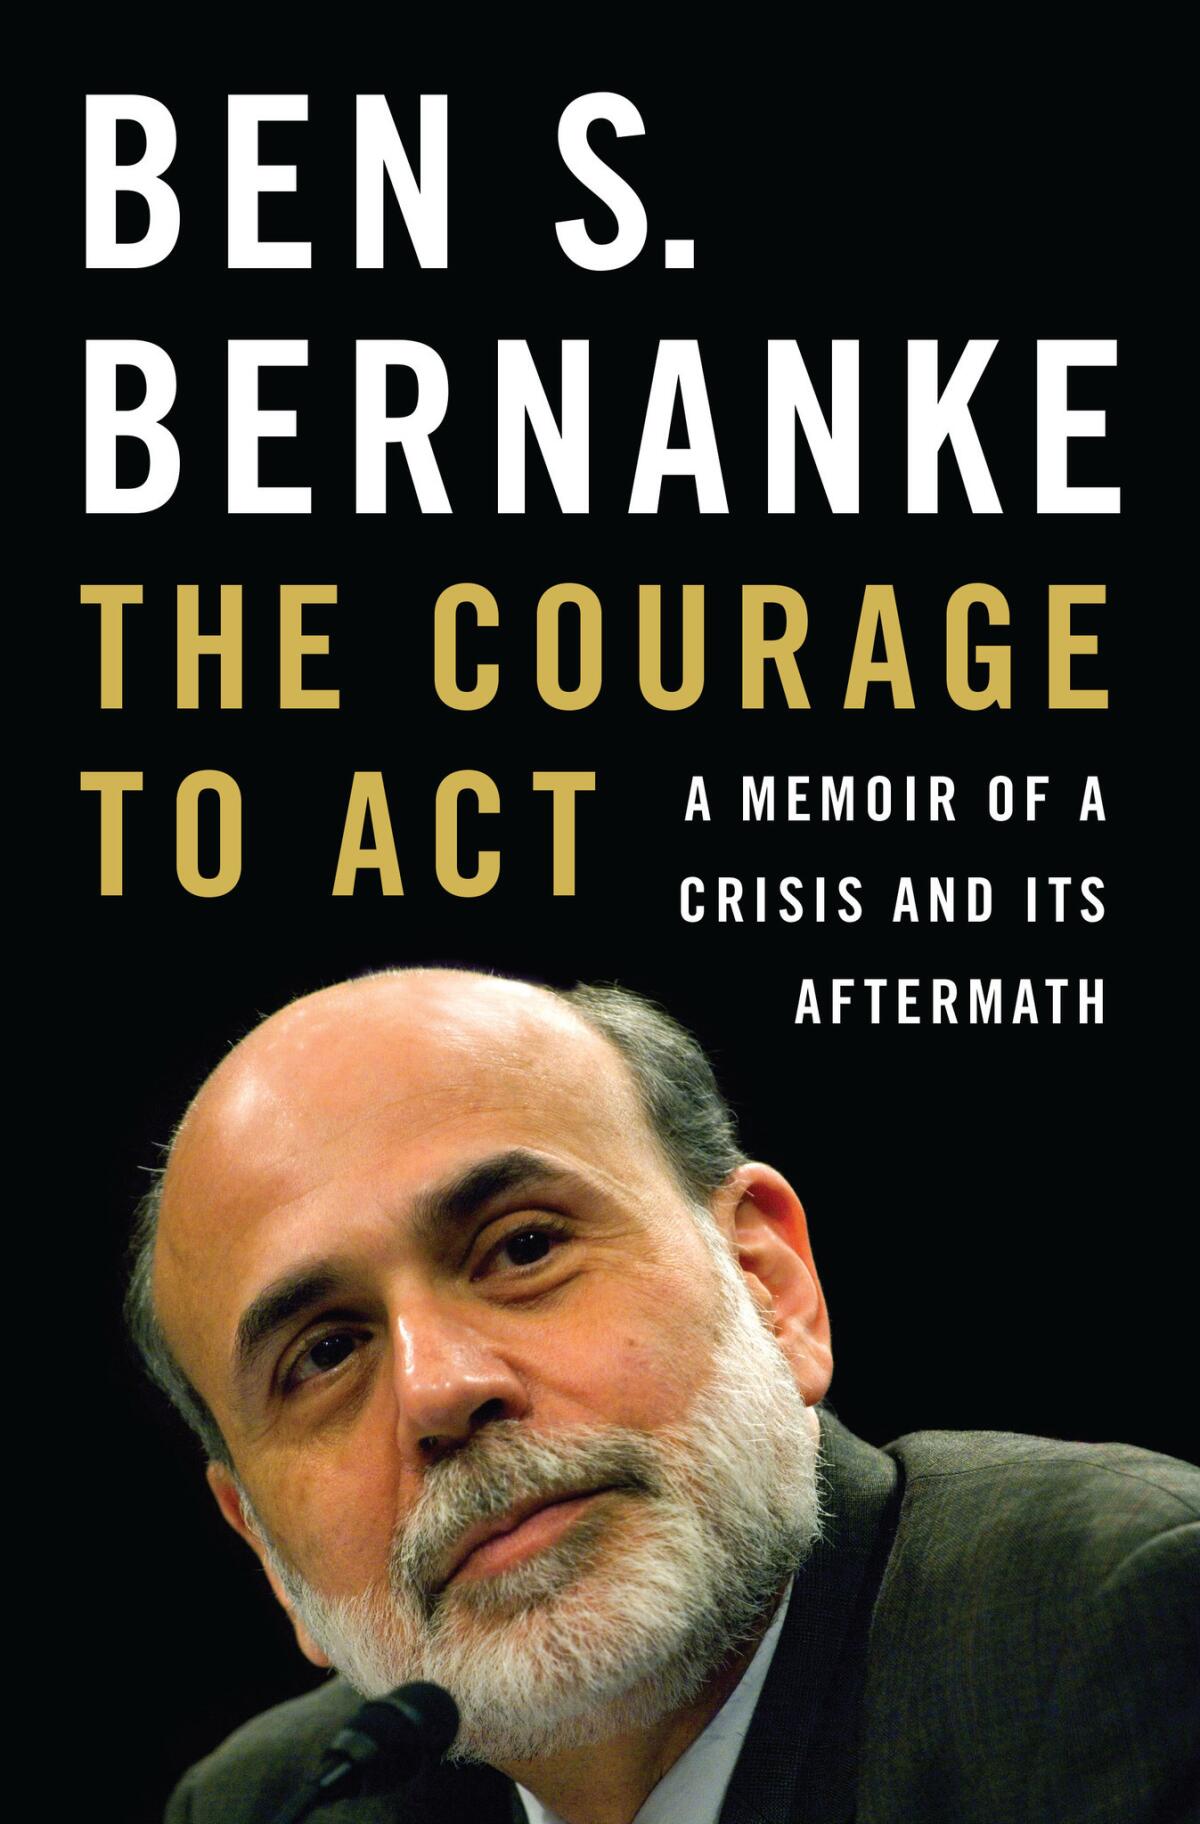 "The Courage to Act" by Ben Bernanke